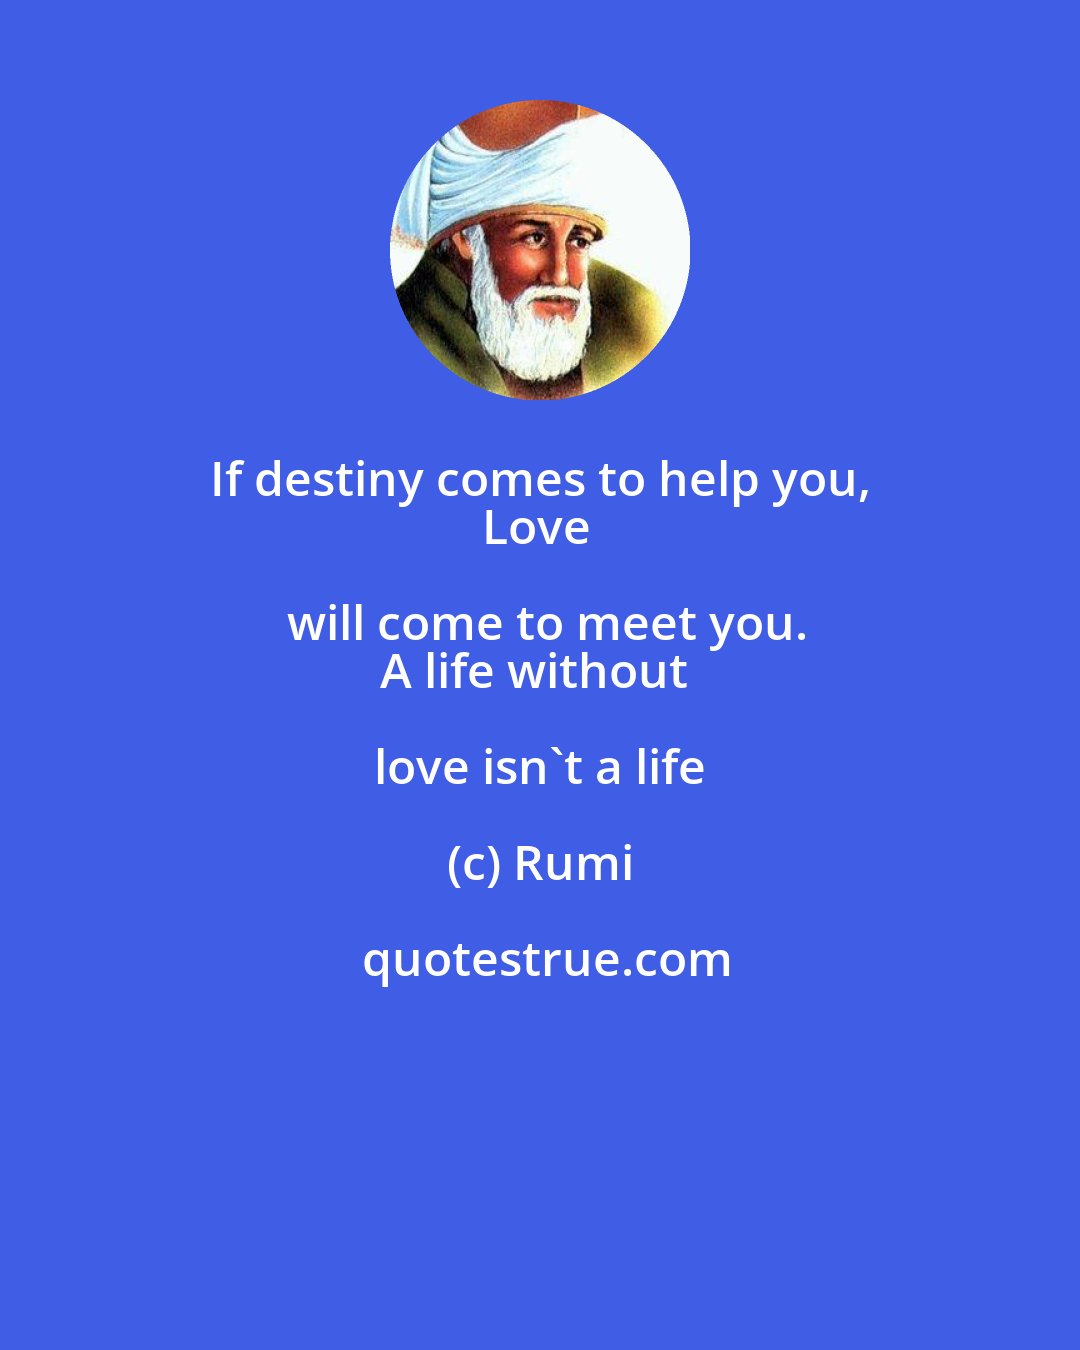 Rumi: If destiny comes to help you, 
Love will come to meet you.
A life without love isn't a life